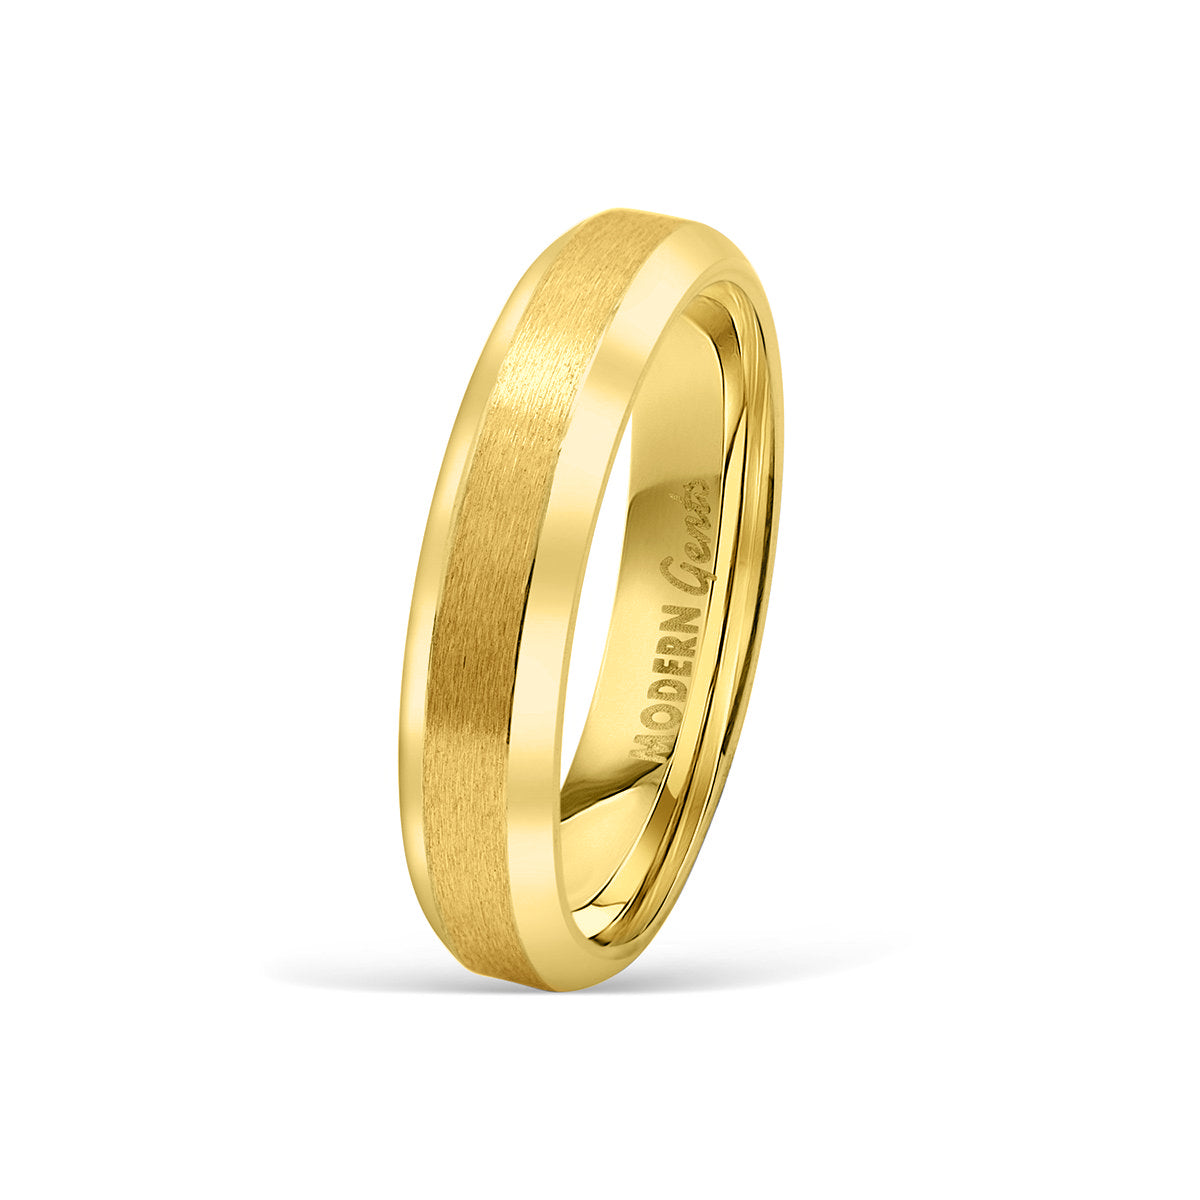 Sleek and minimal gold ring for ladies and gents shown in gold